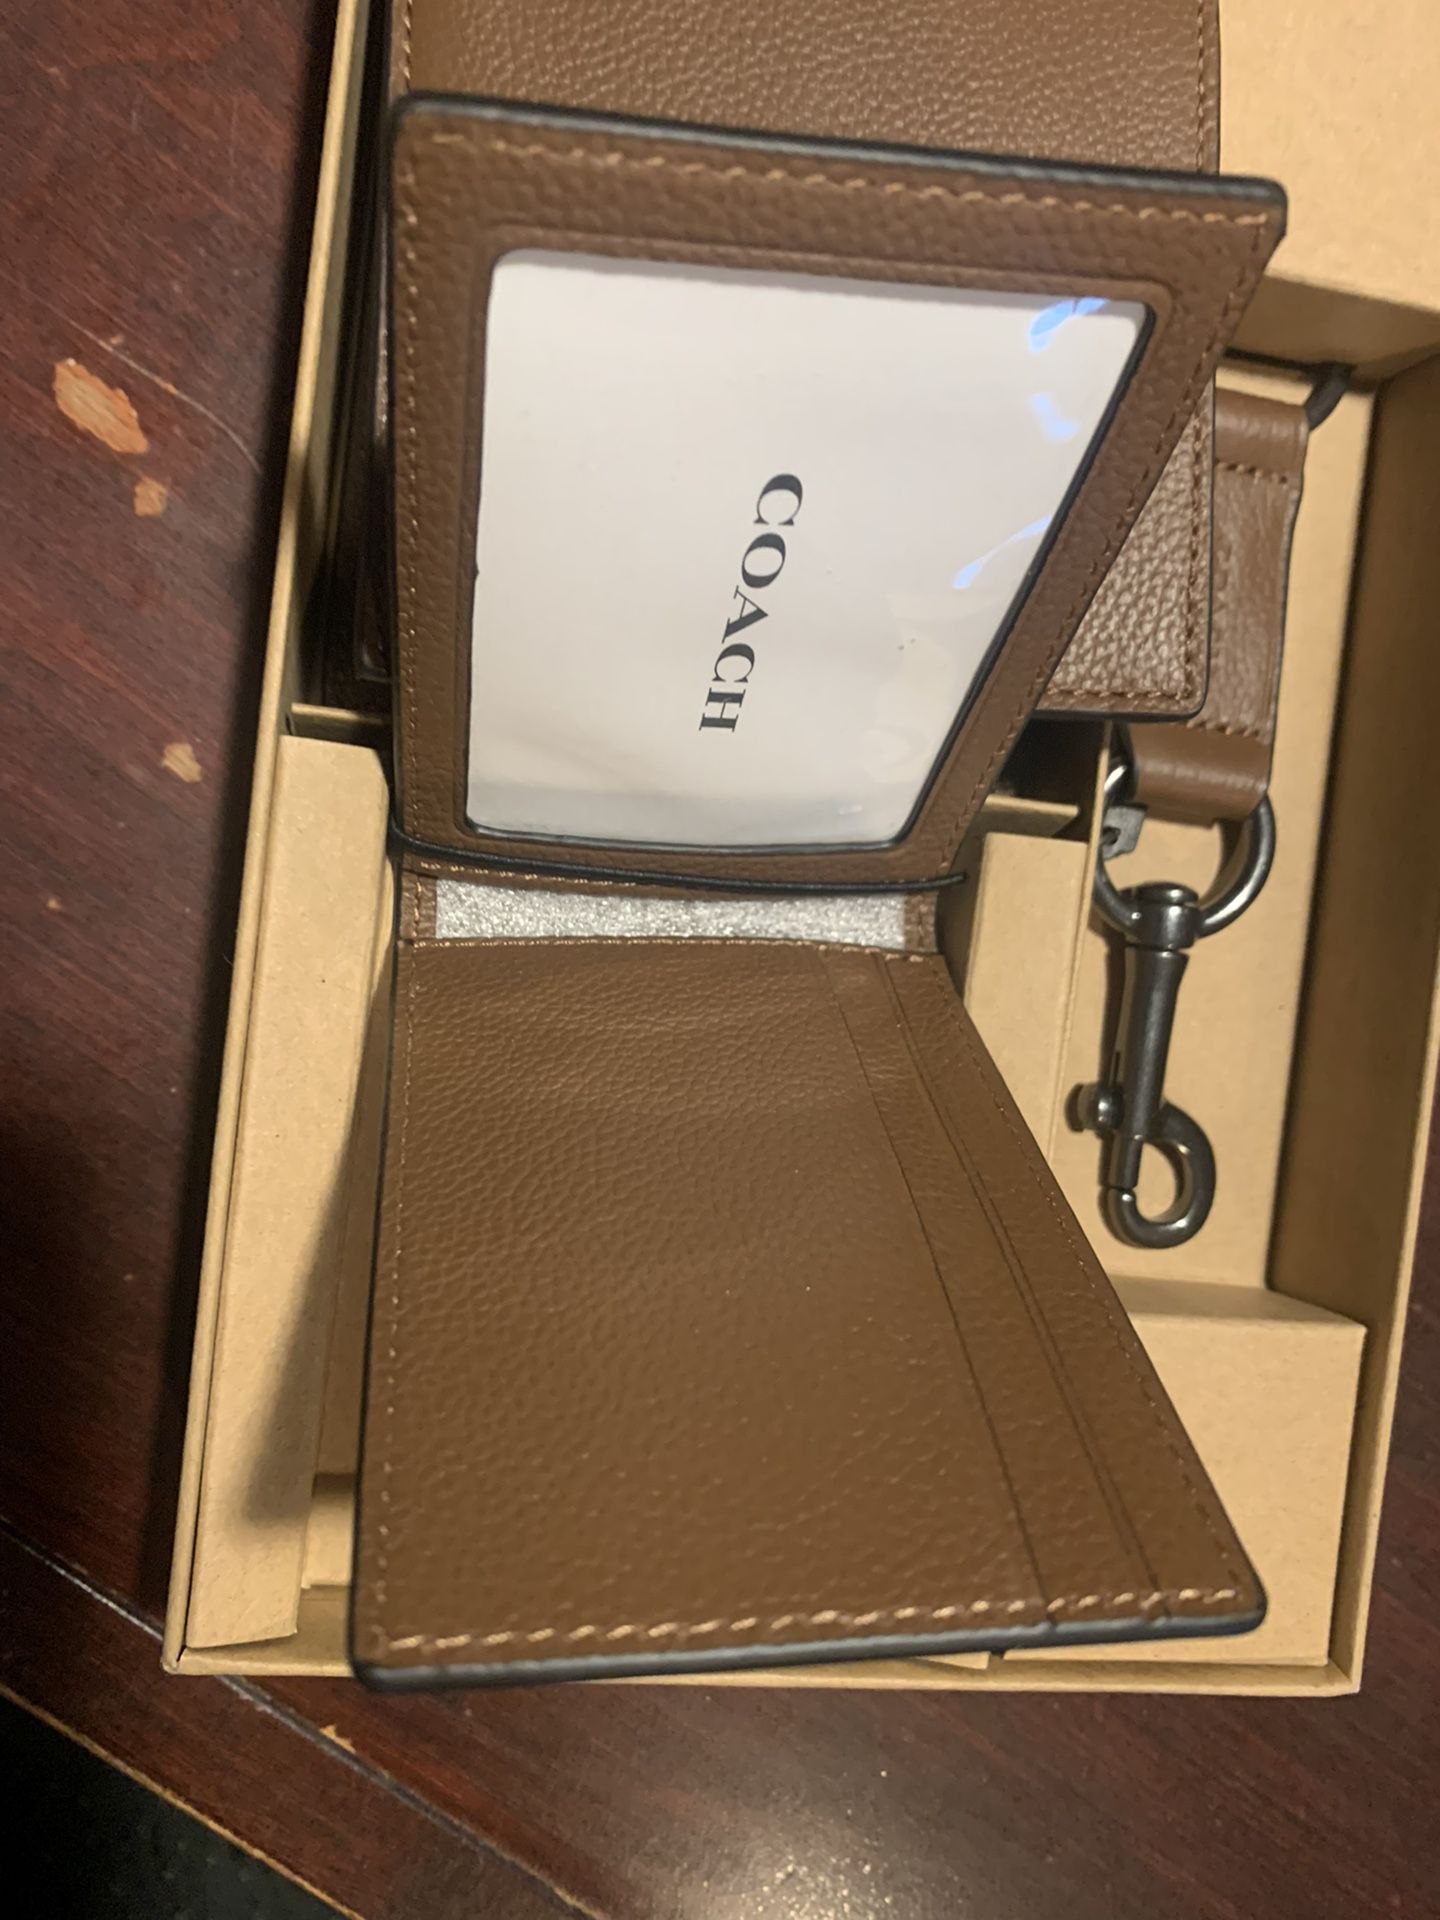 Coach Stripe Heart Signature Tech Wallet Brand New With Tags MSRP $298  Great Valentine's Day Gift for Sale in Anaheim, CA - OfferUp